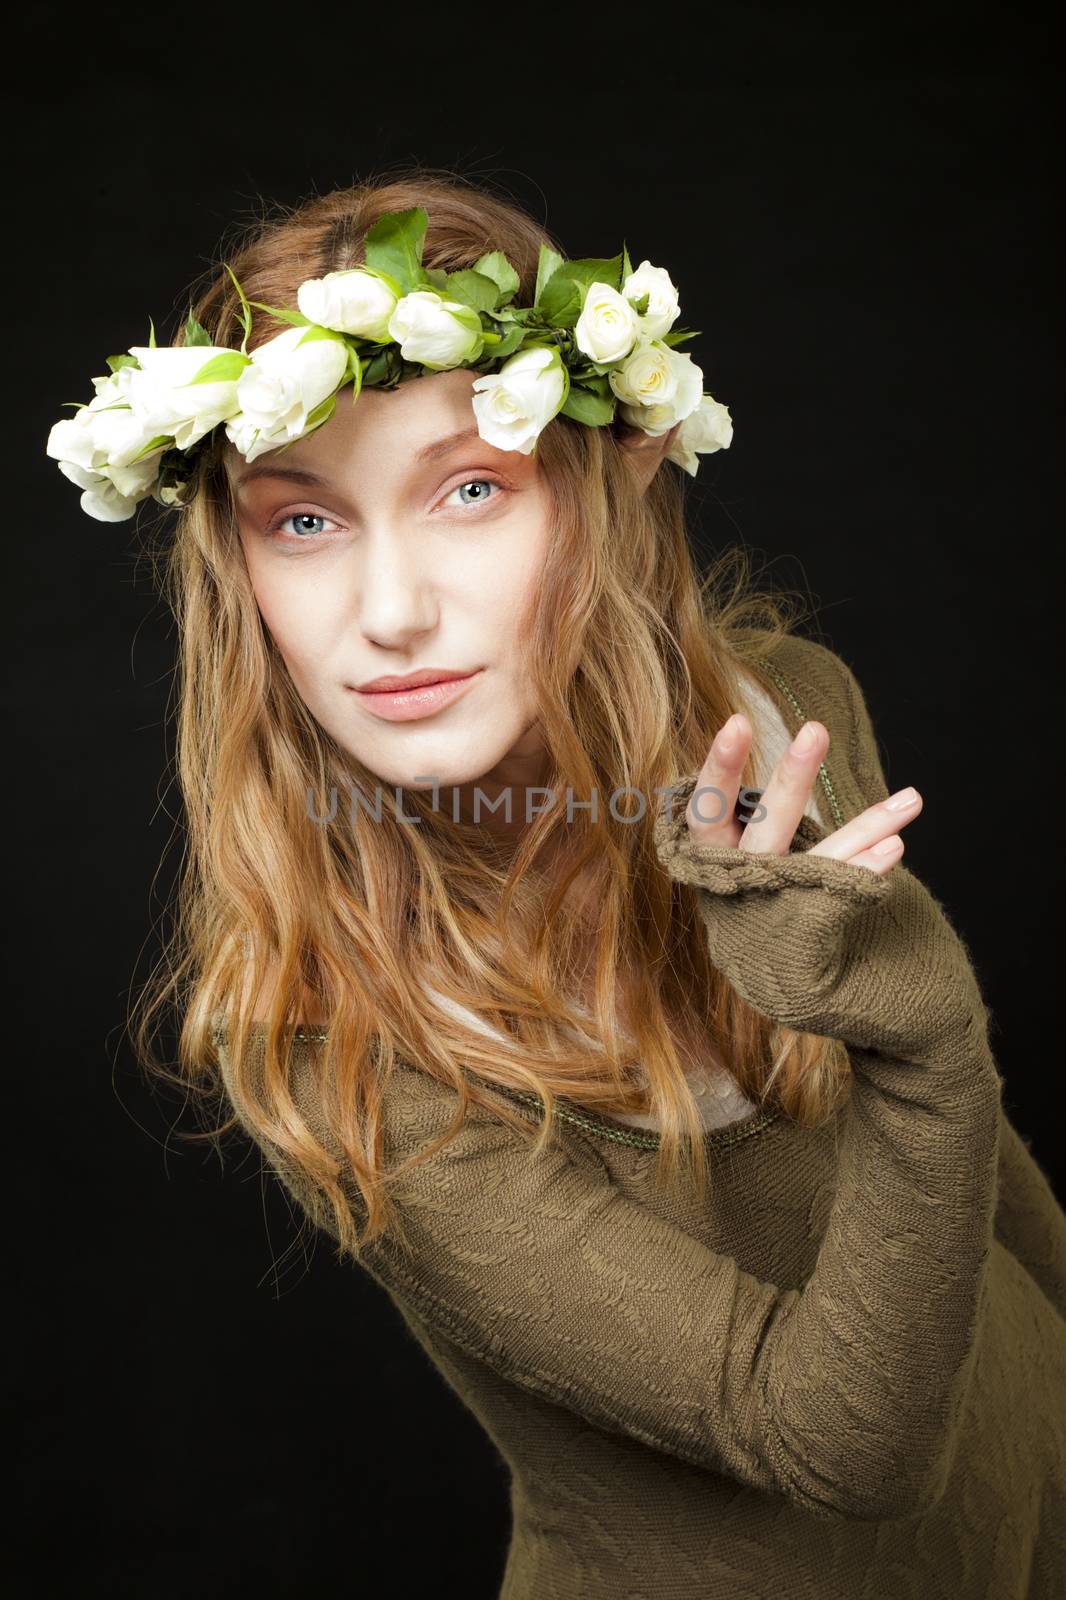 A smiling beautiful woman with white roses wreath in her long hair is holding or peeking behind nothing.